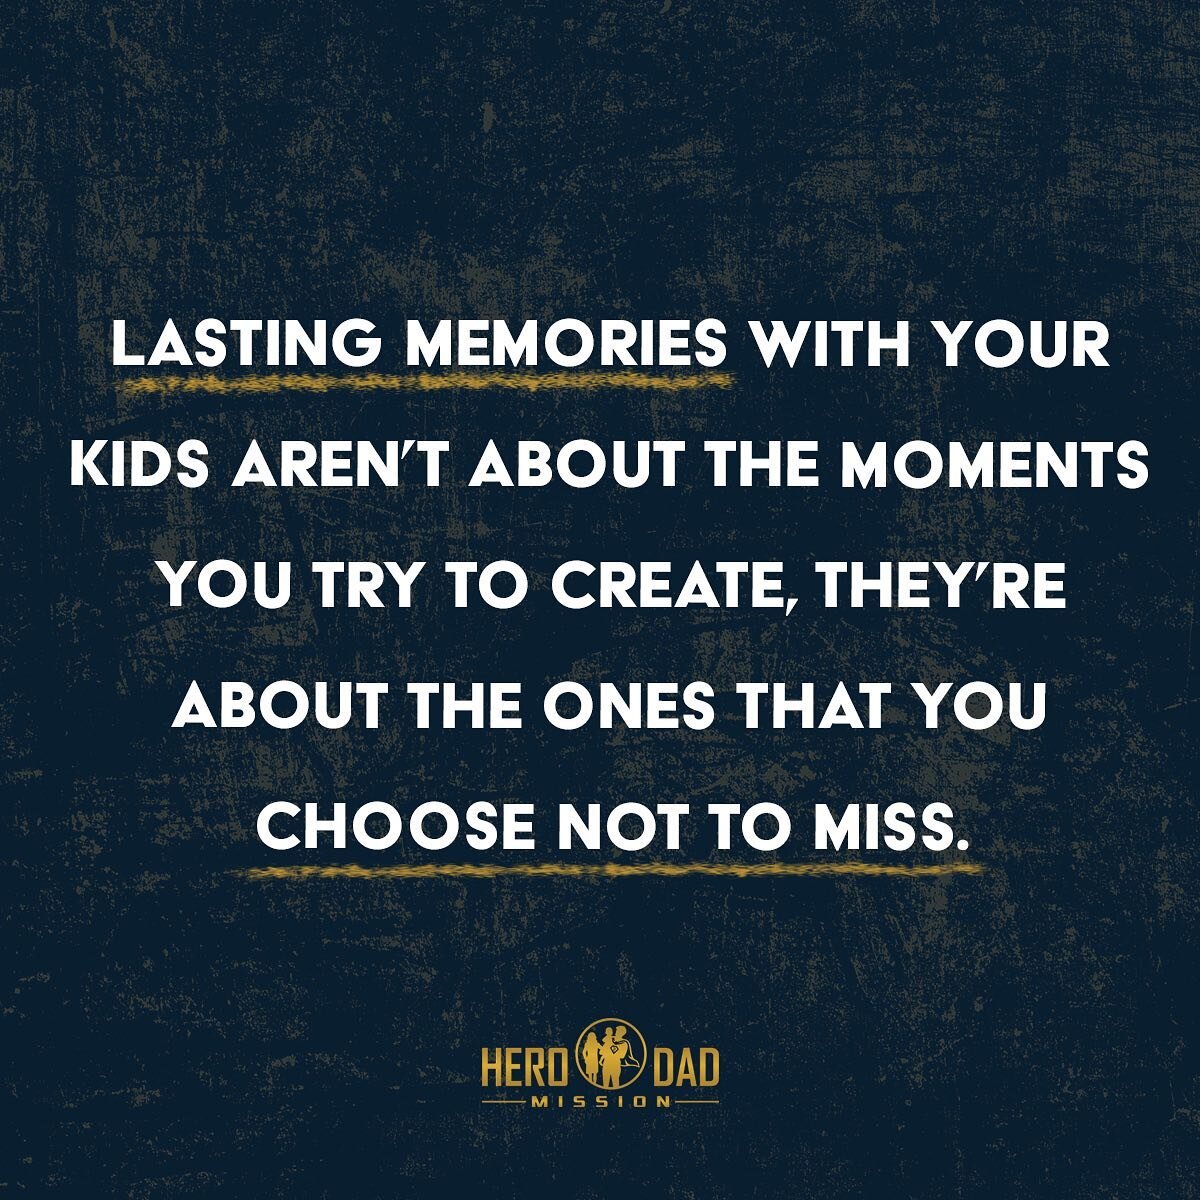 Building a legacy and having your kids remember you is about spending real quality time with them. 

Quality time isn&rsquo;t about mountain top experiences it&rsquo;s about being there for the everyday moments in your kid&rsquo;s lives and making la